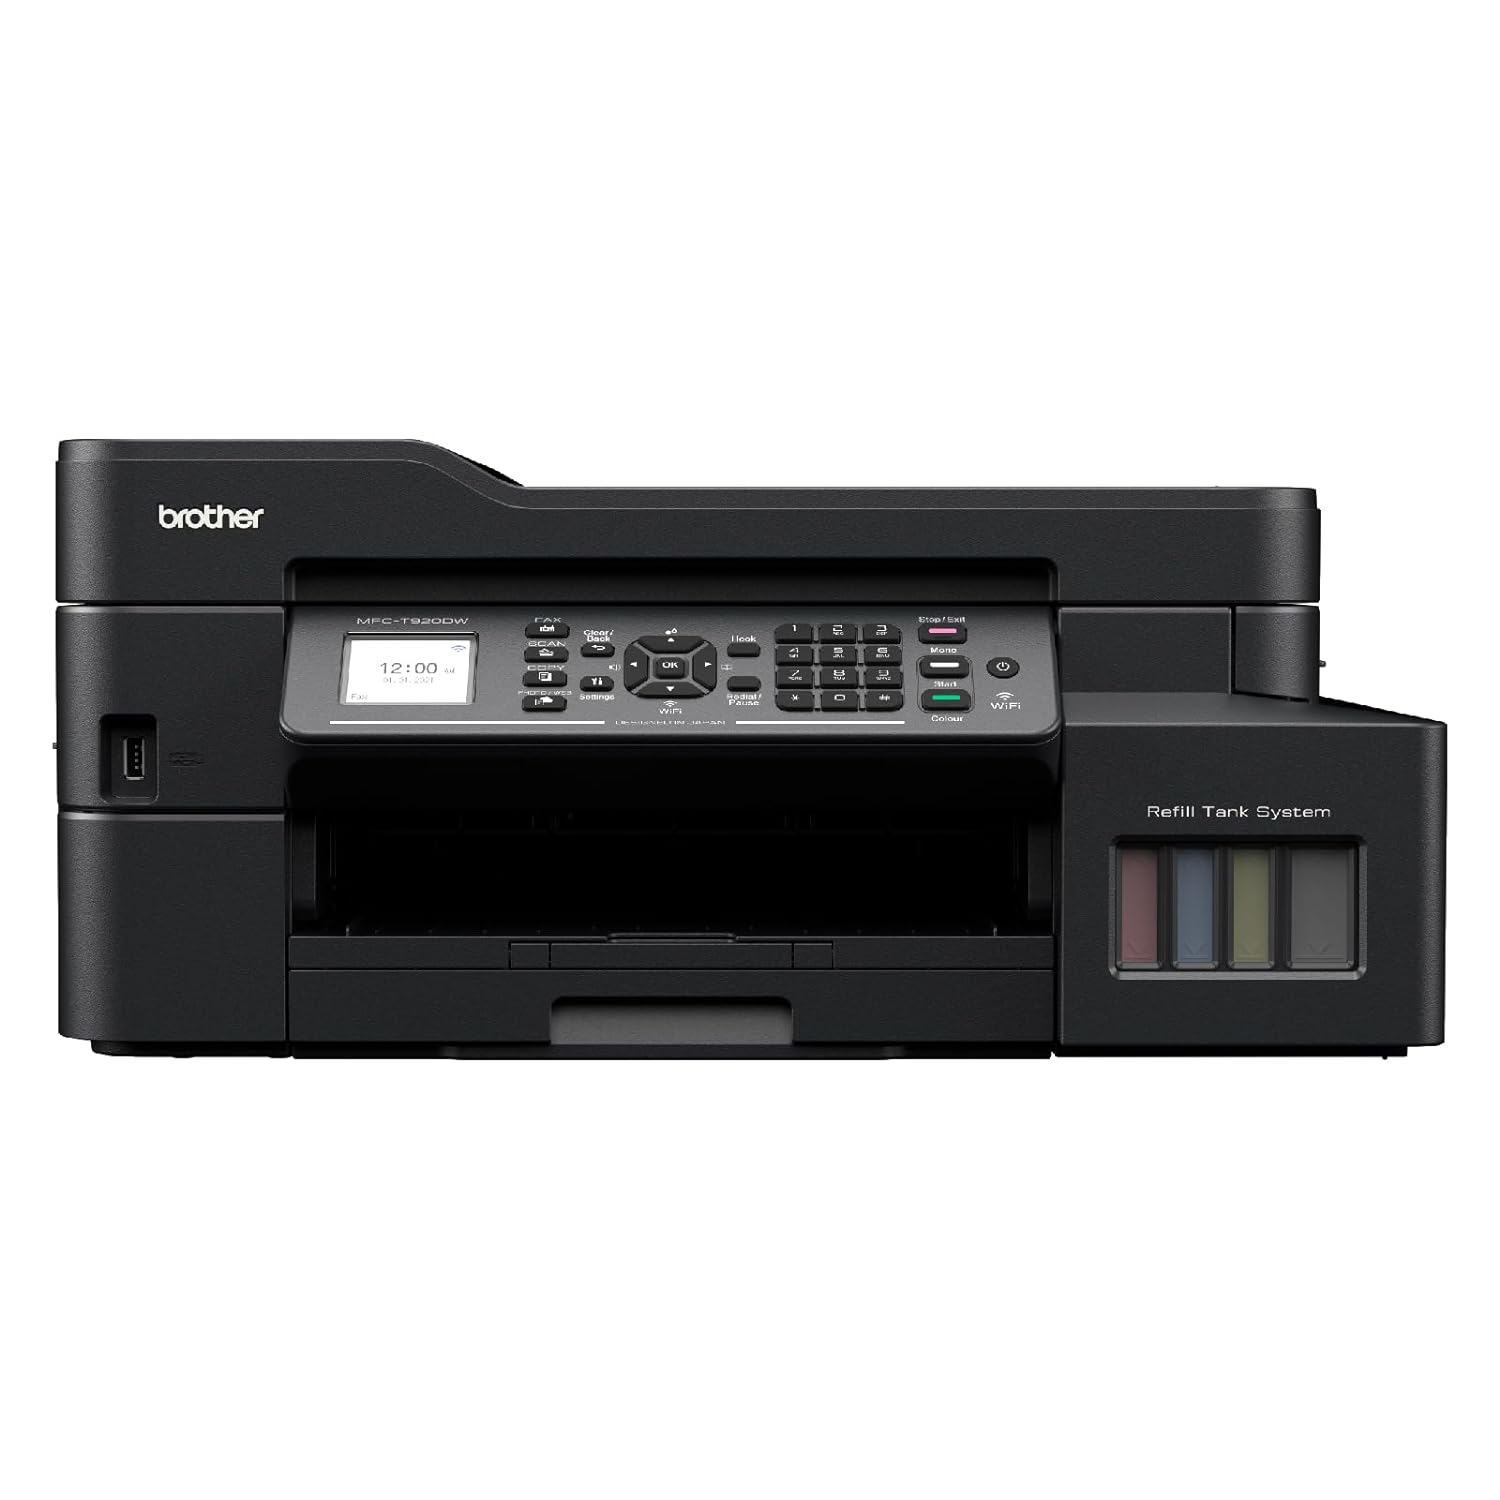 Printer Brother  Ink Tank MFC-T920DW All-in One with Wi-Fi and Auto Duplex